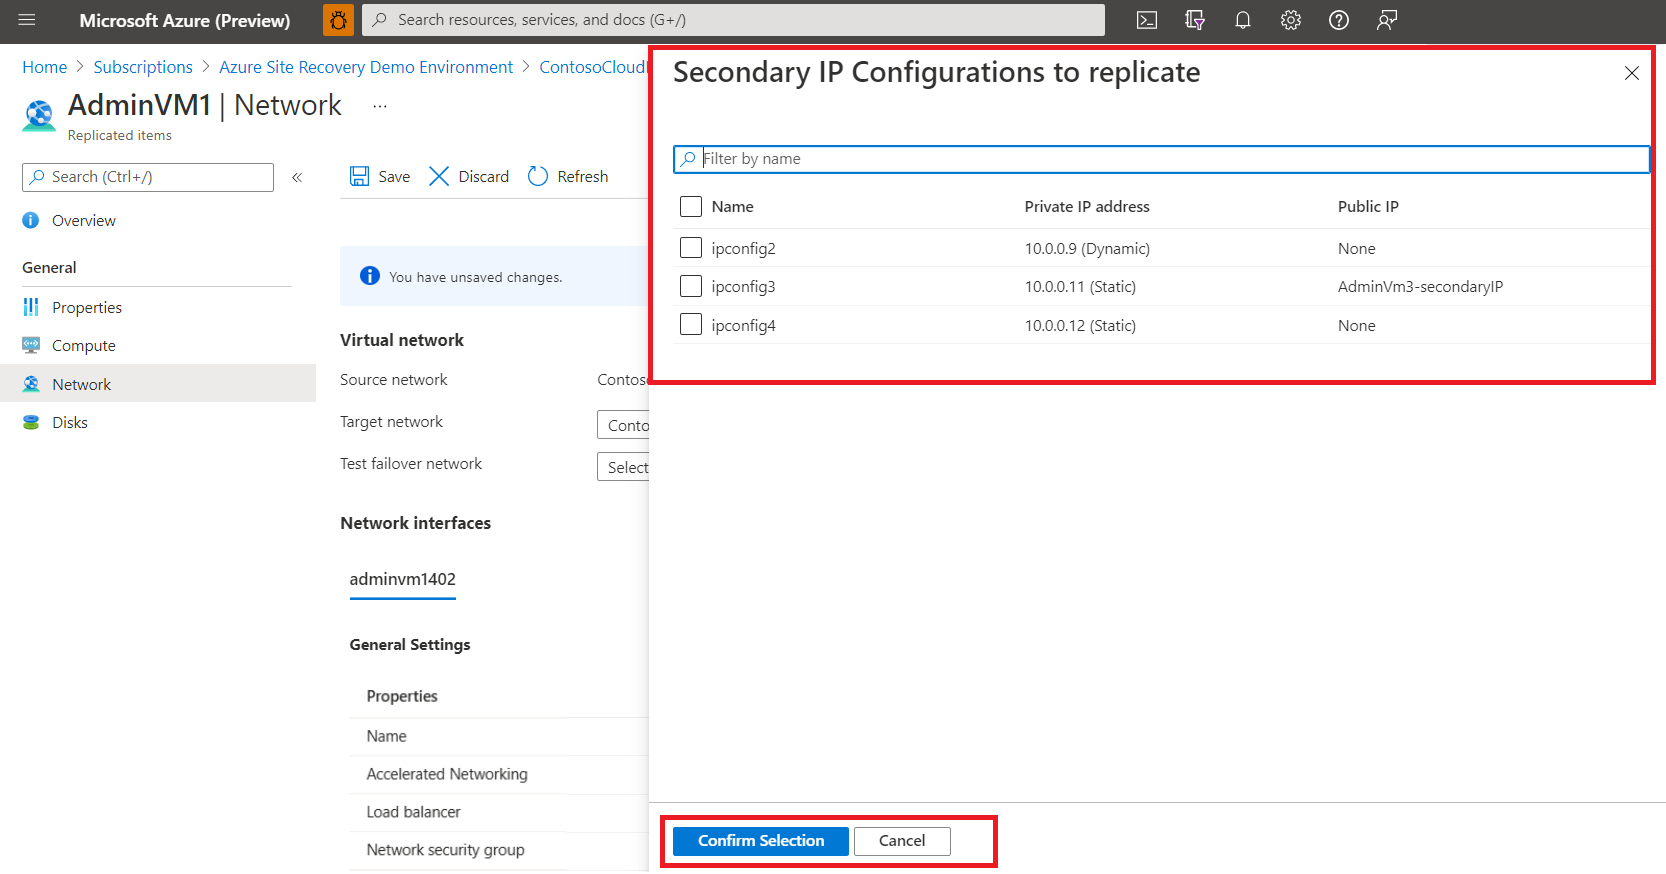 Select and Add IP Configurations